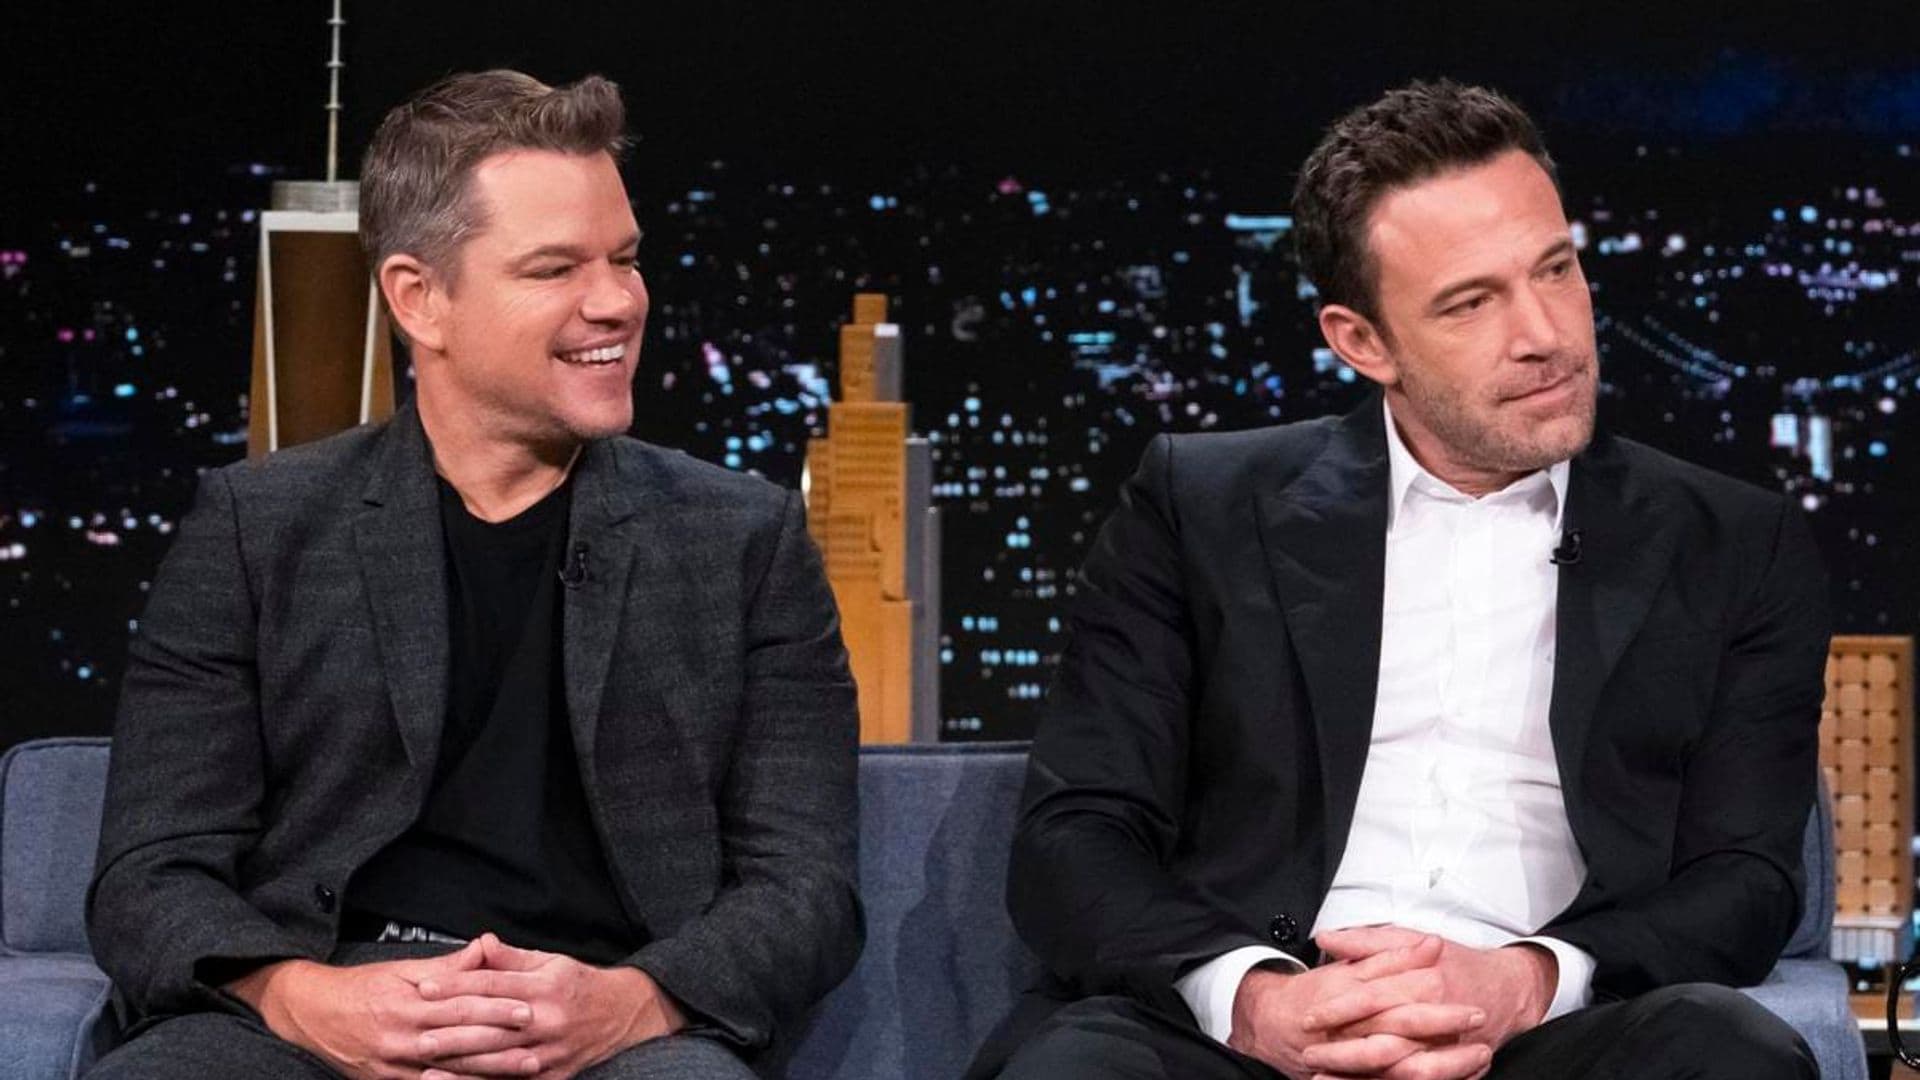 Ben Affleck and Matt Damon are launching their own production company